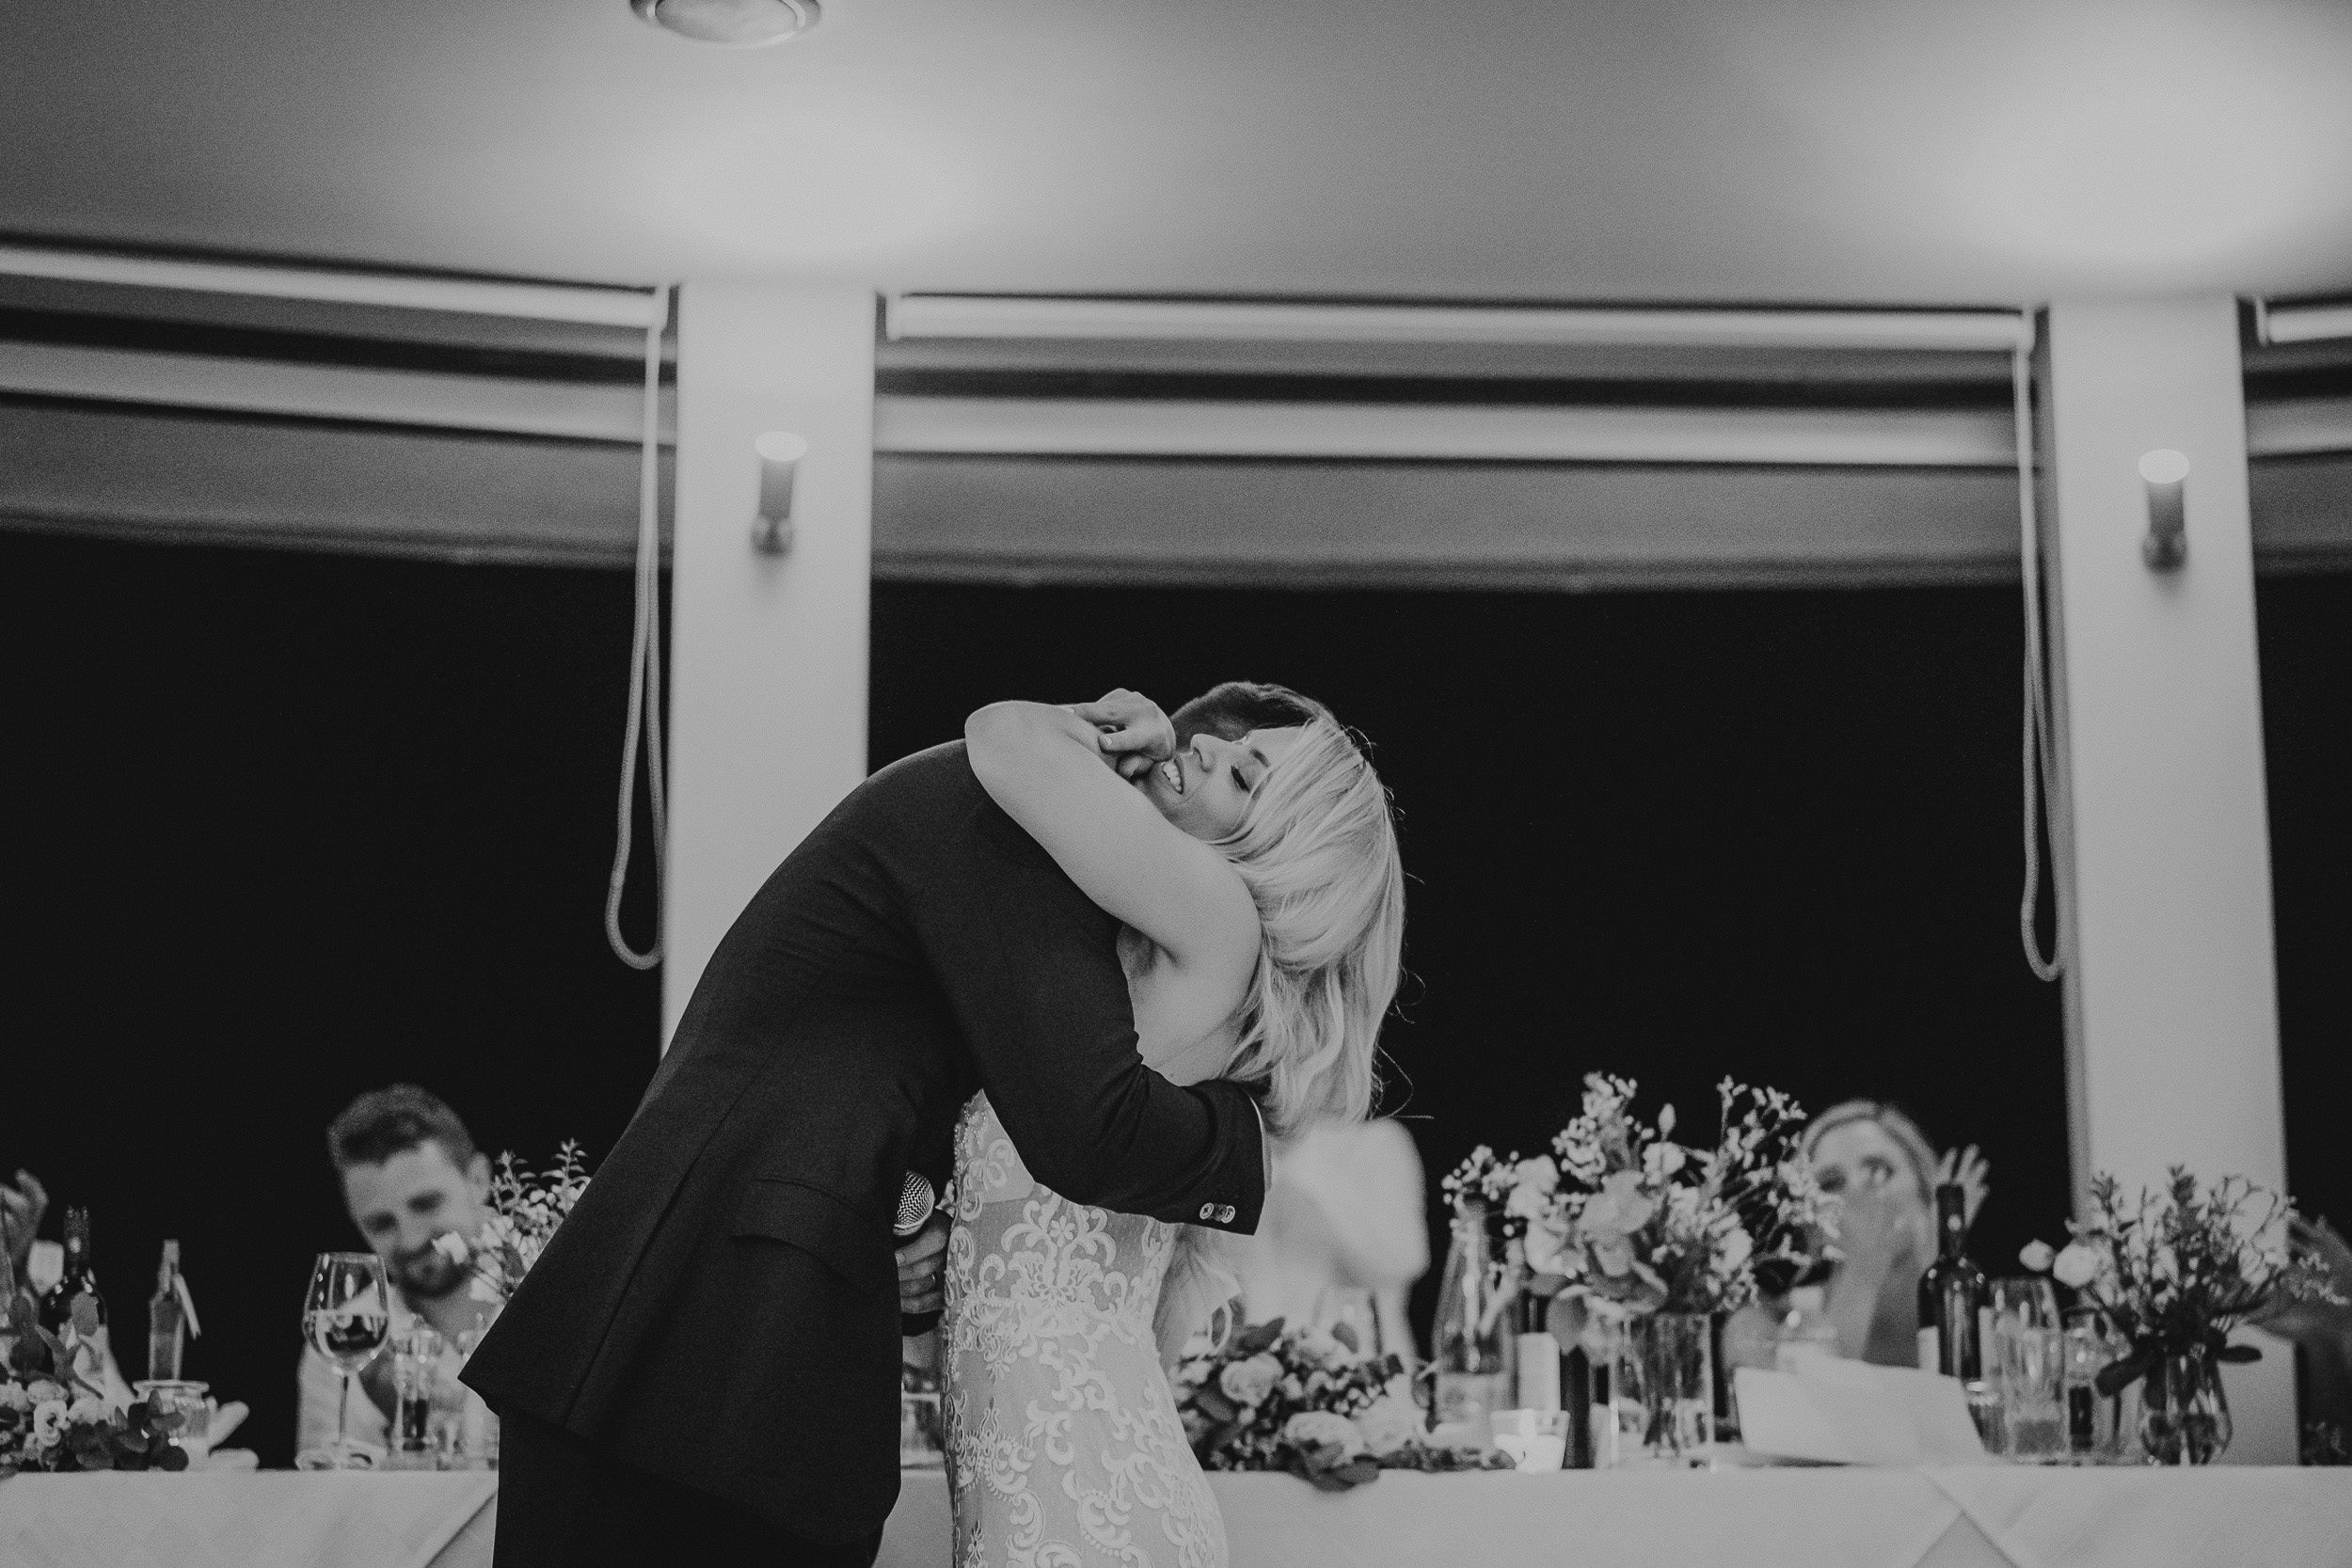 A wedding photographer capturing a bride and groom kissing during their wedding reception.